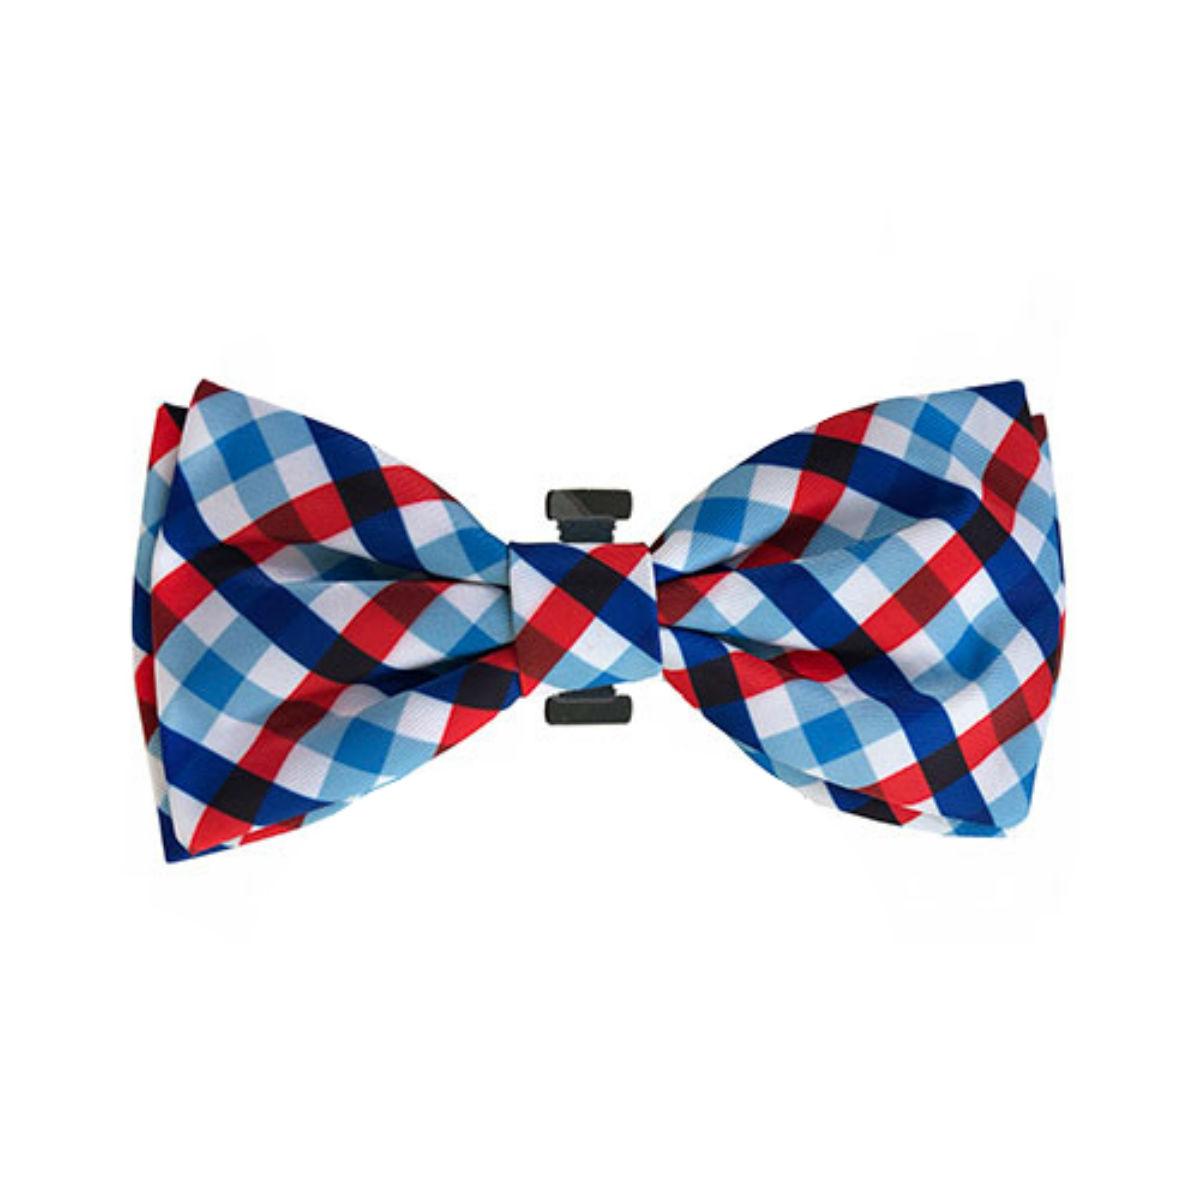 Huxley & Kent Dog and Cat Bow Tie Collar Attachment - Picnic Check